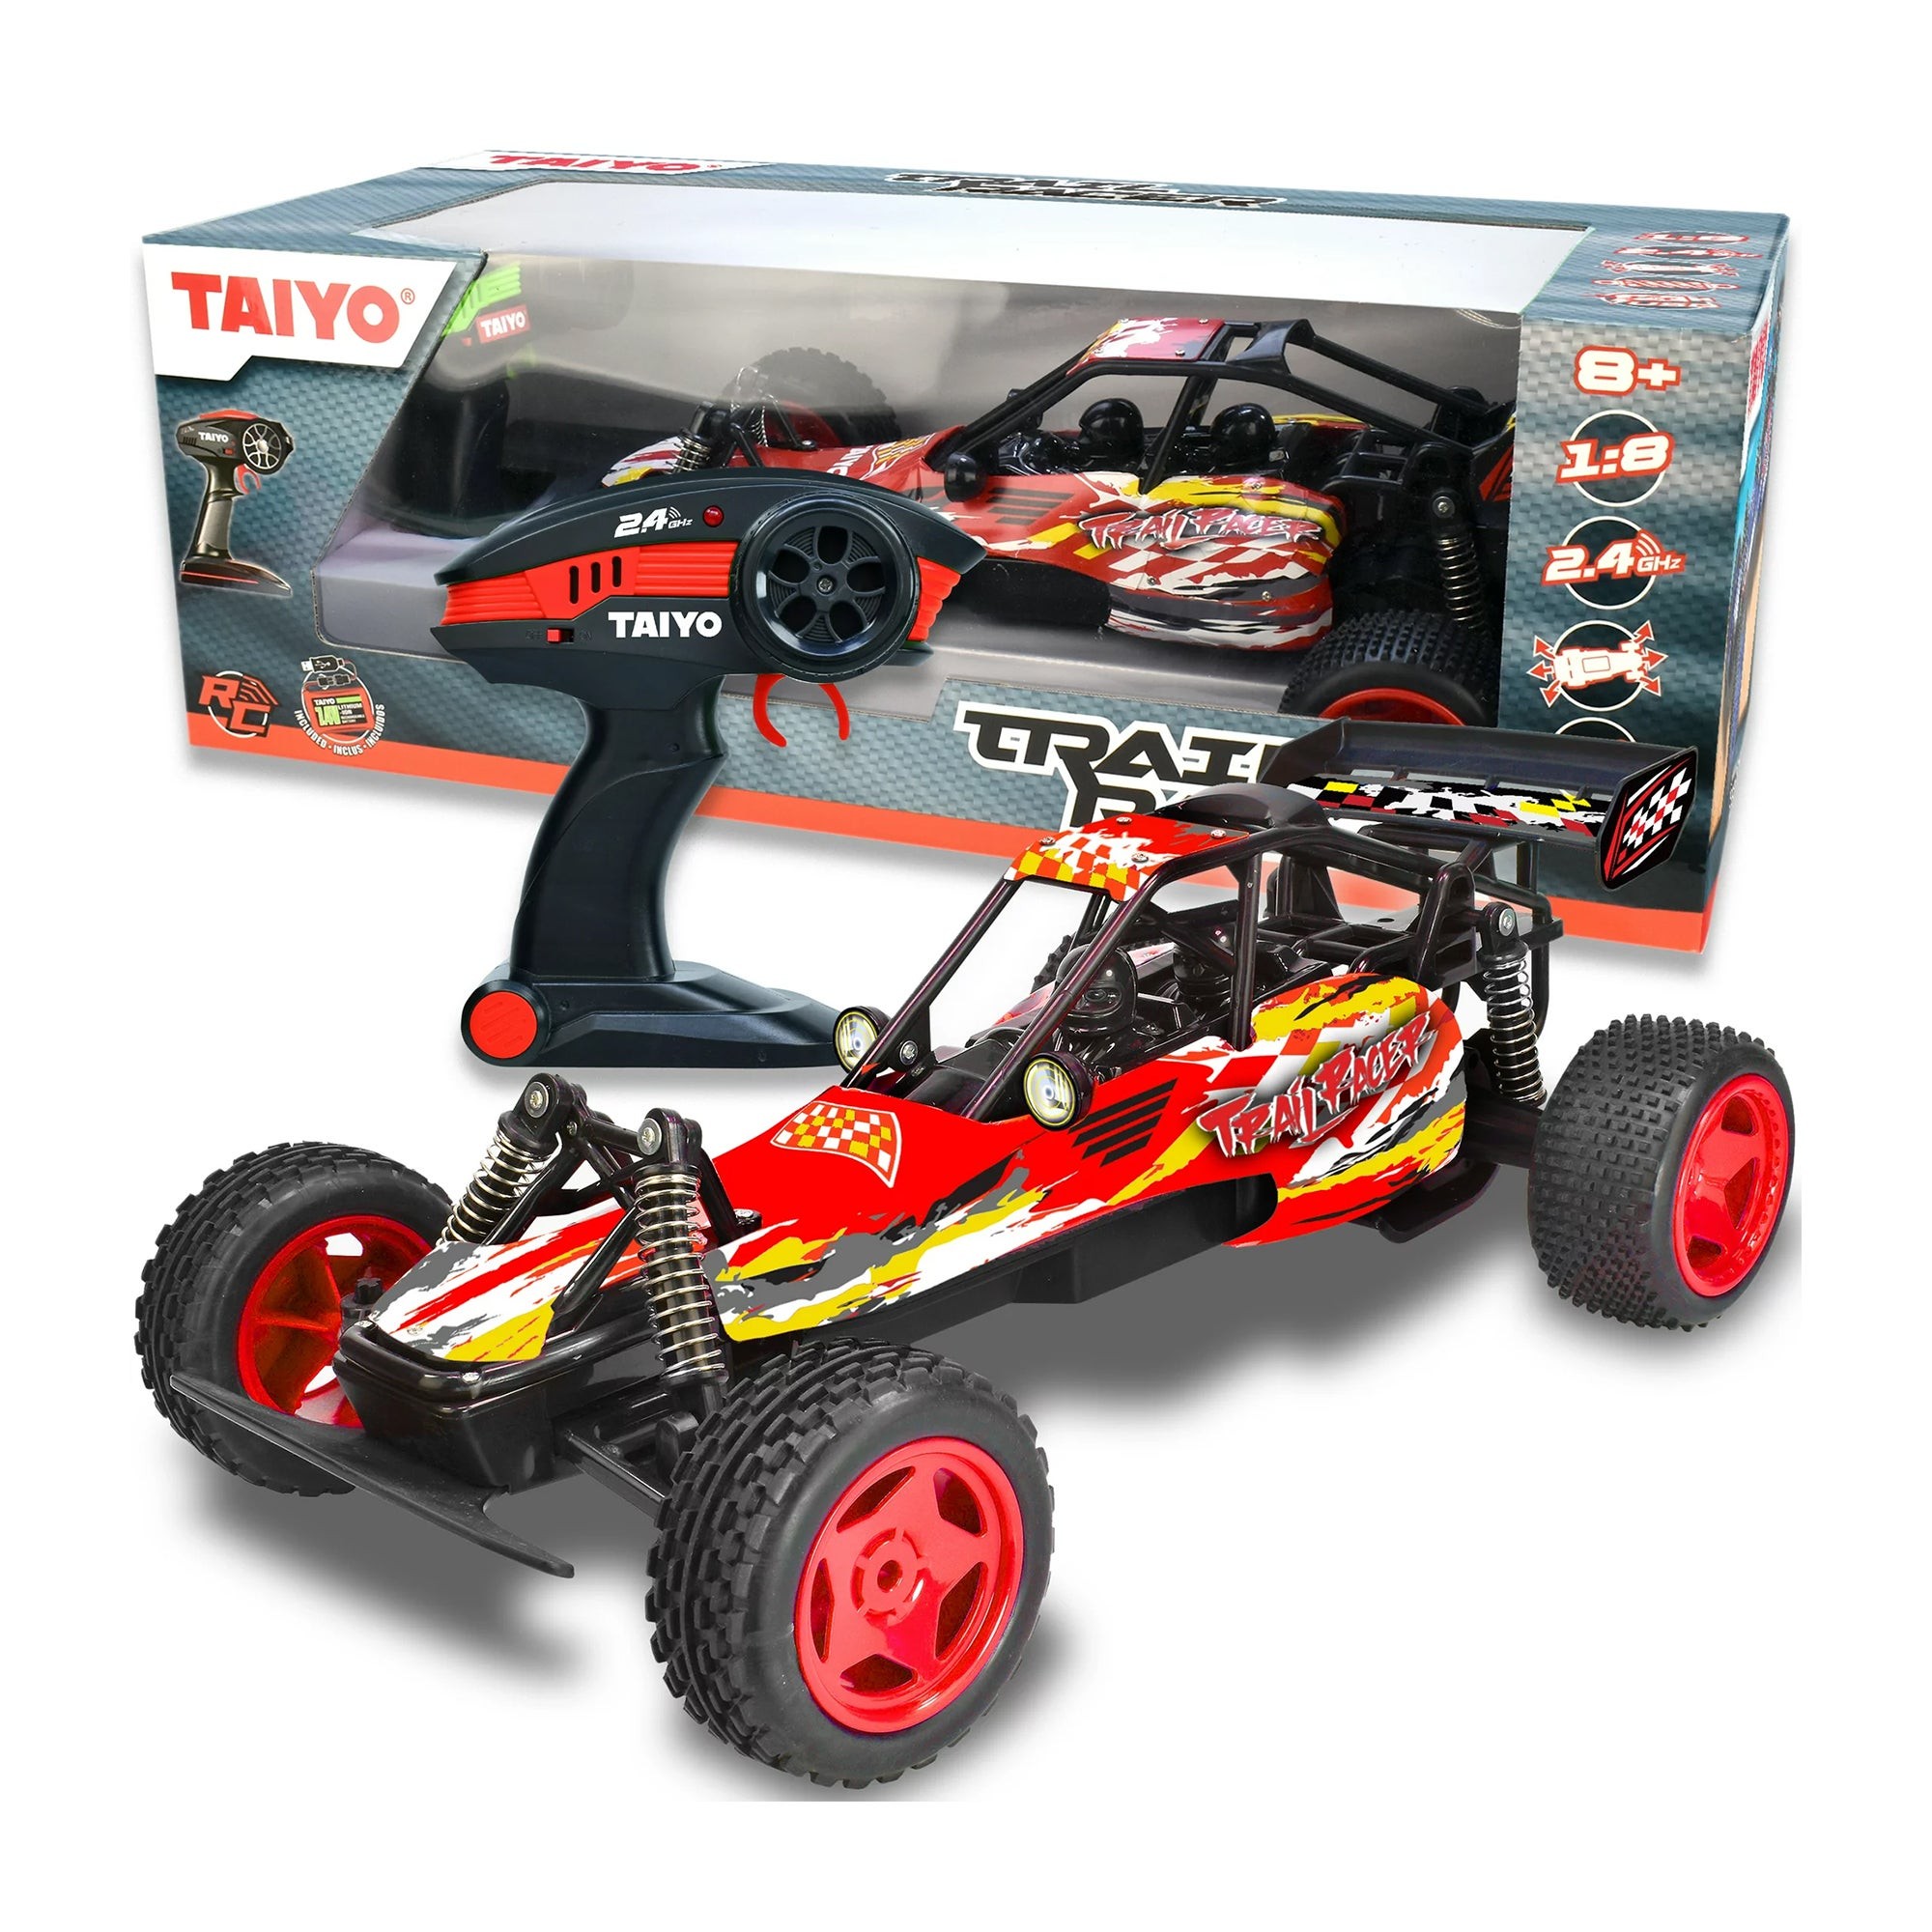 Trail Racer 1:8 Scale Remote Control Car Red